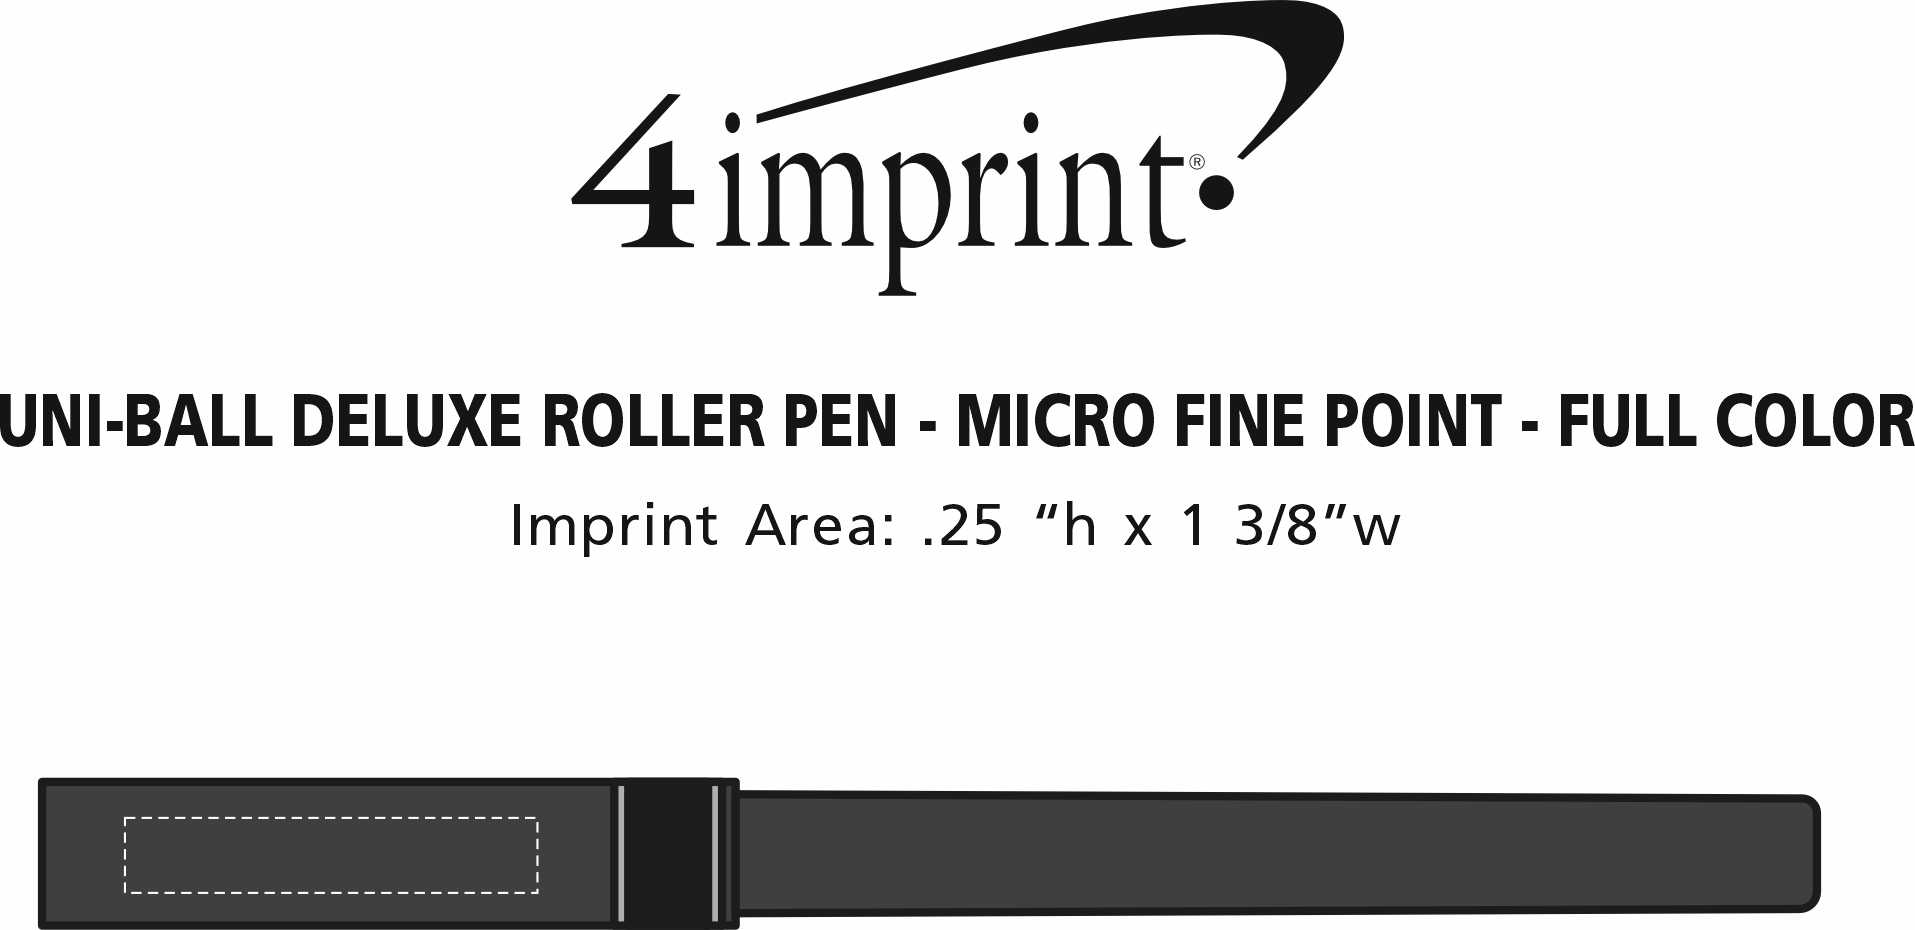 Imprint Area of uni-ball Deluxe Roller Pen - Micro Fine Point - Full Color